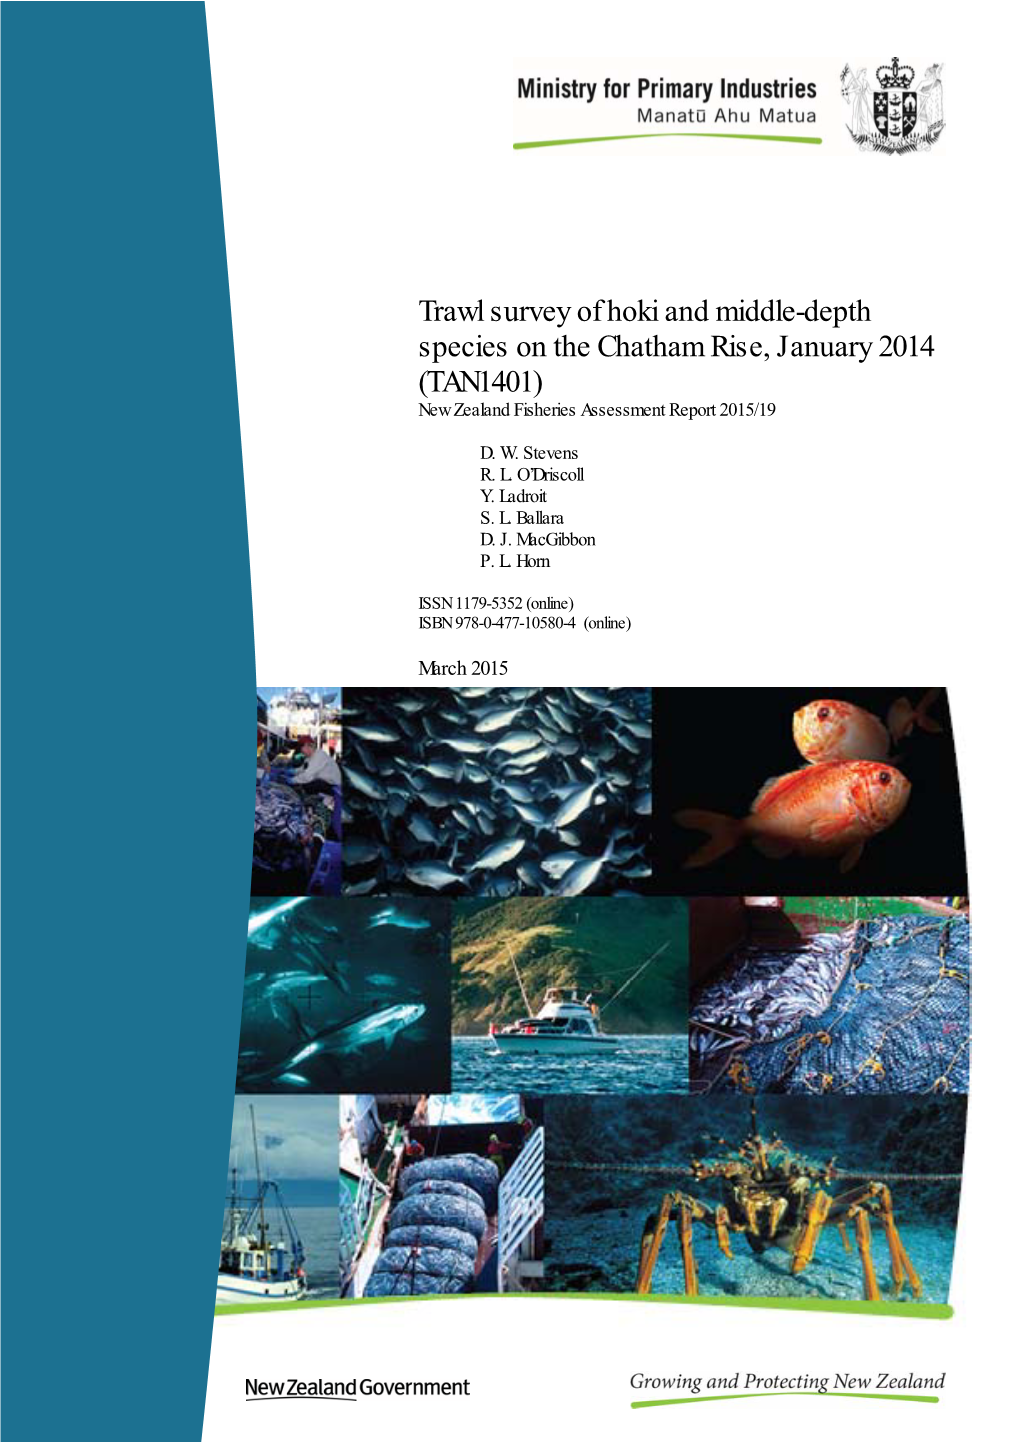 Trawl Survey of Hoki and Middle-Depth Species on the Chatham Rise, January 2014 (TAN1401) New Zealand Fisheries Assessment Report 2015/19